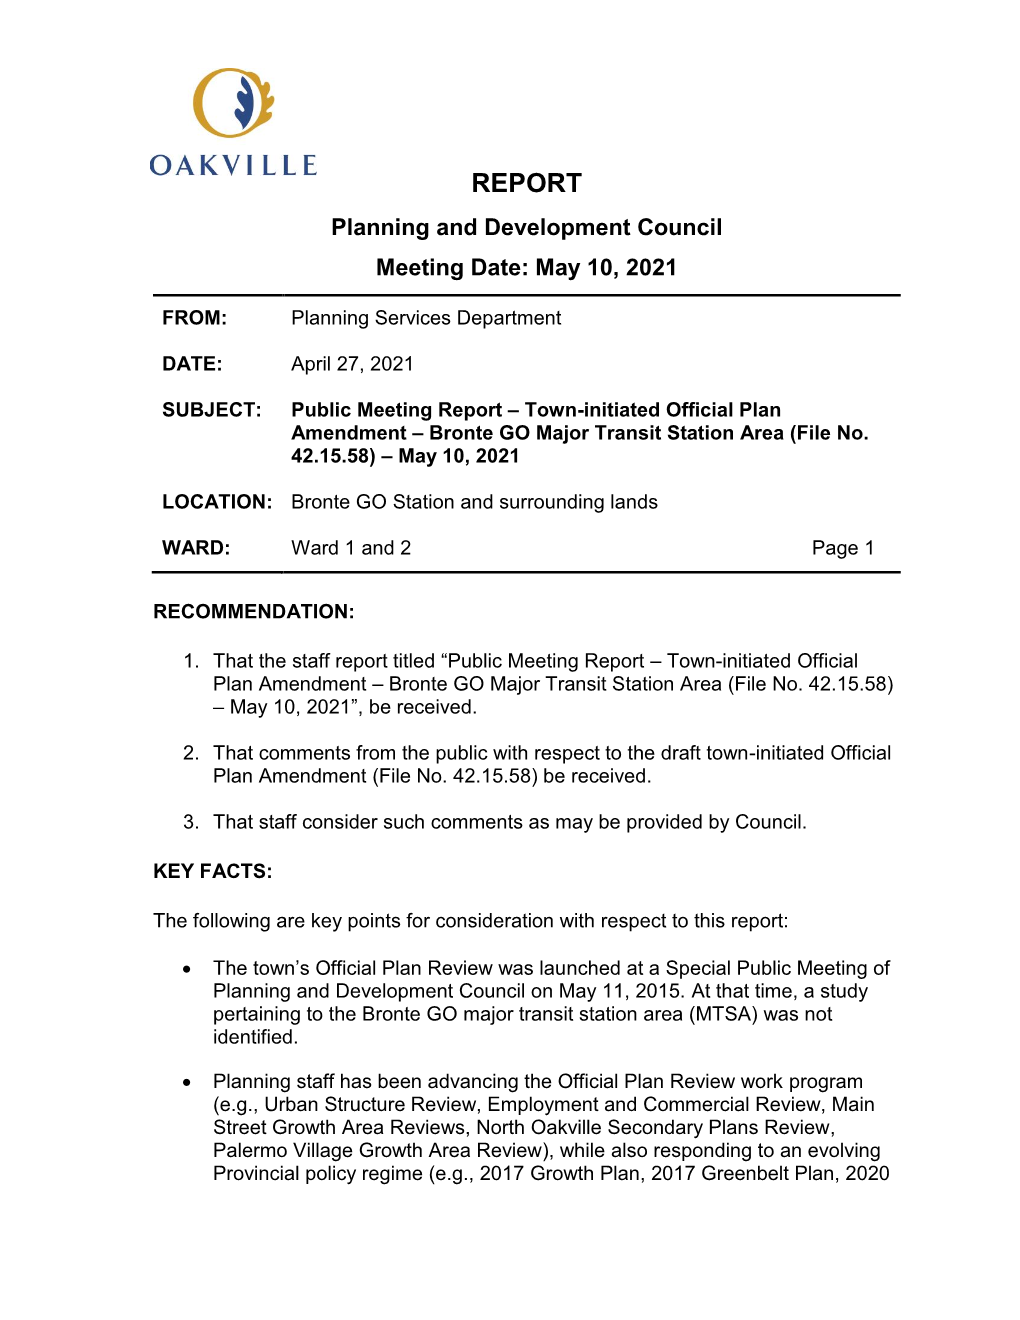 Public Meeting Report – Town-Initiated Official Plan Amendment – Bronte GO Major Transit Station Area (File No. 42.15.58) – May 10, 2021